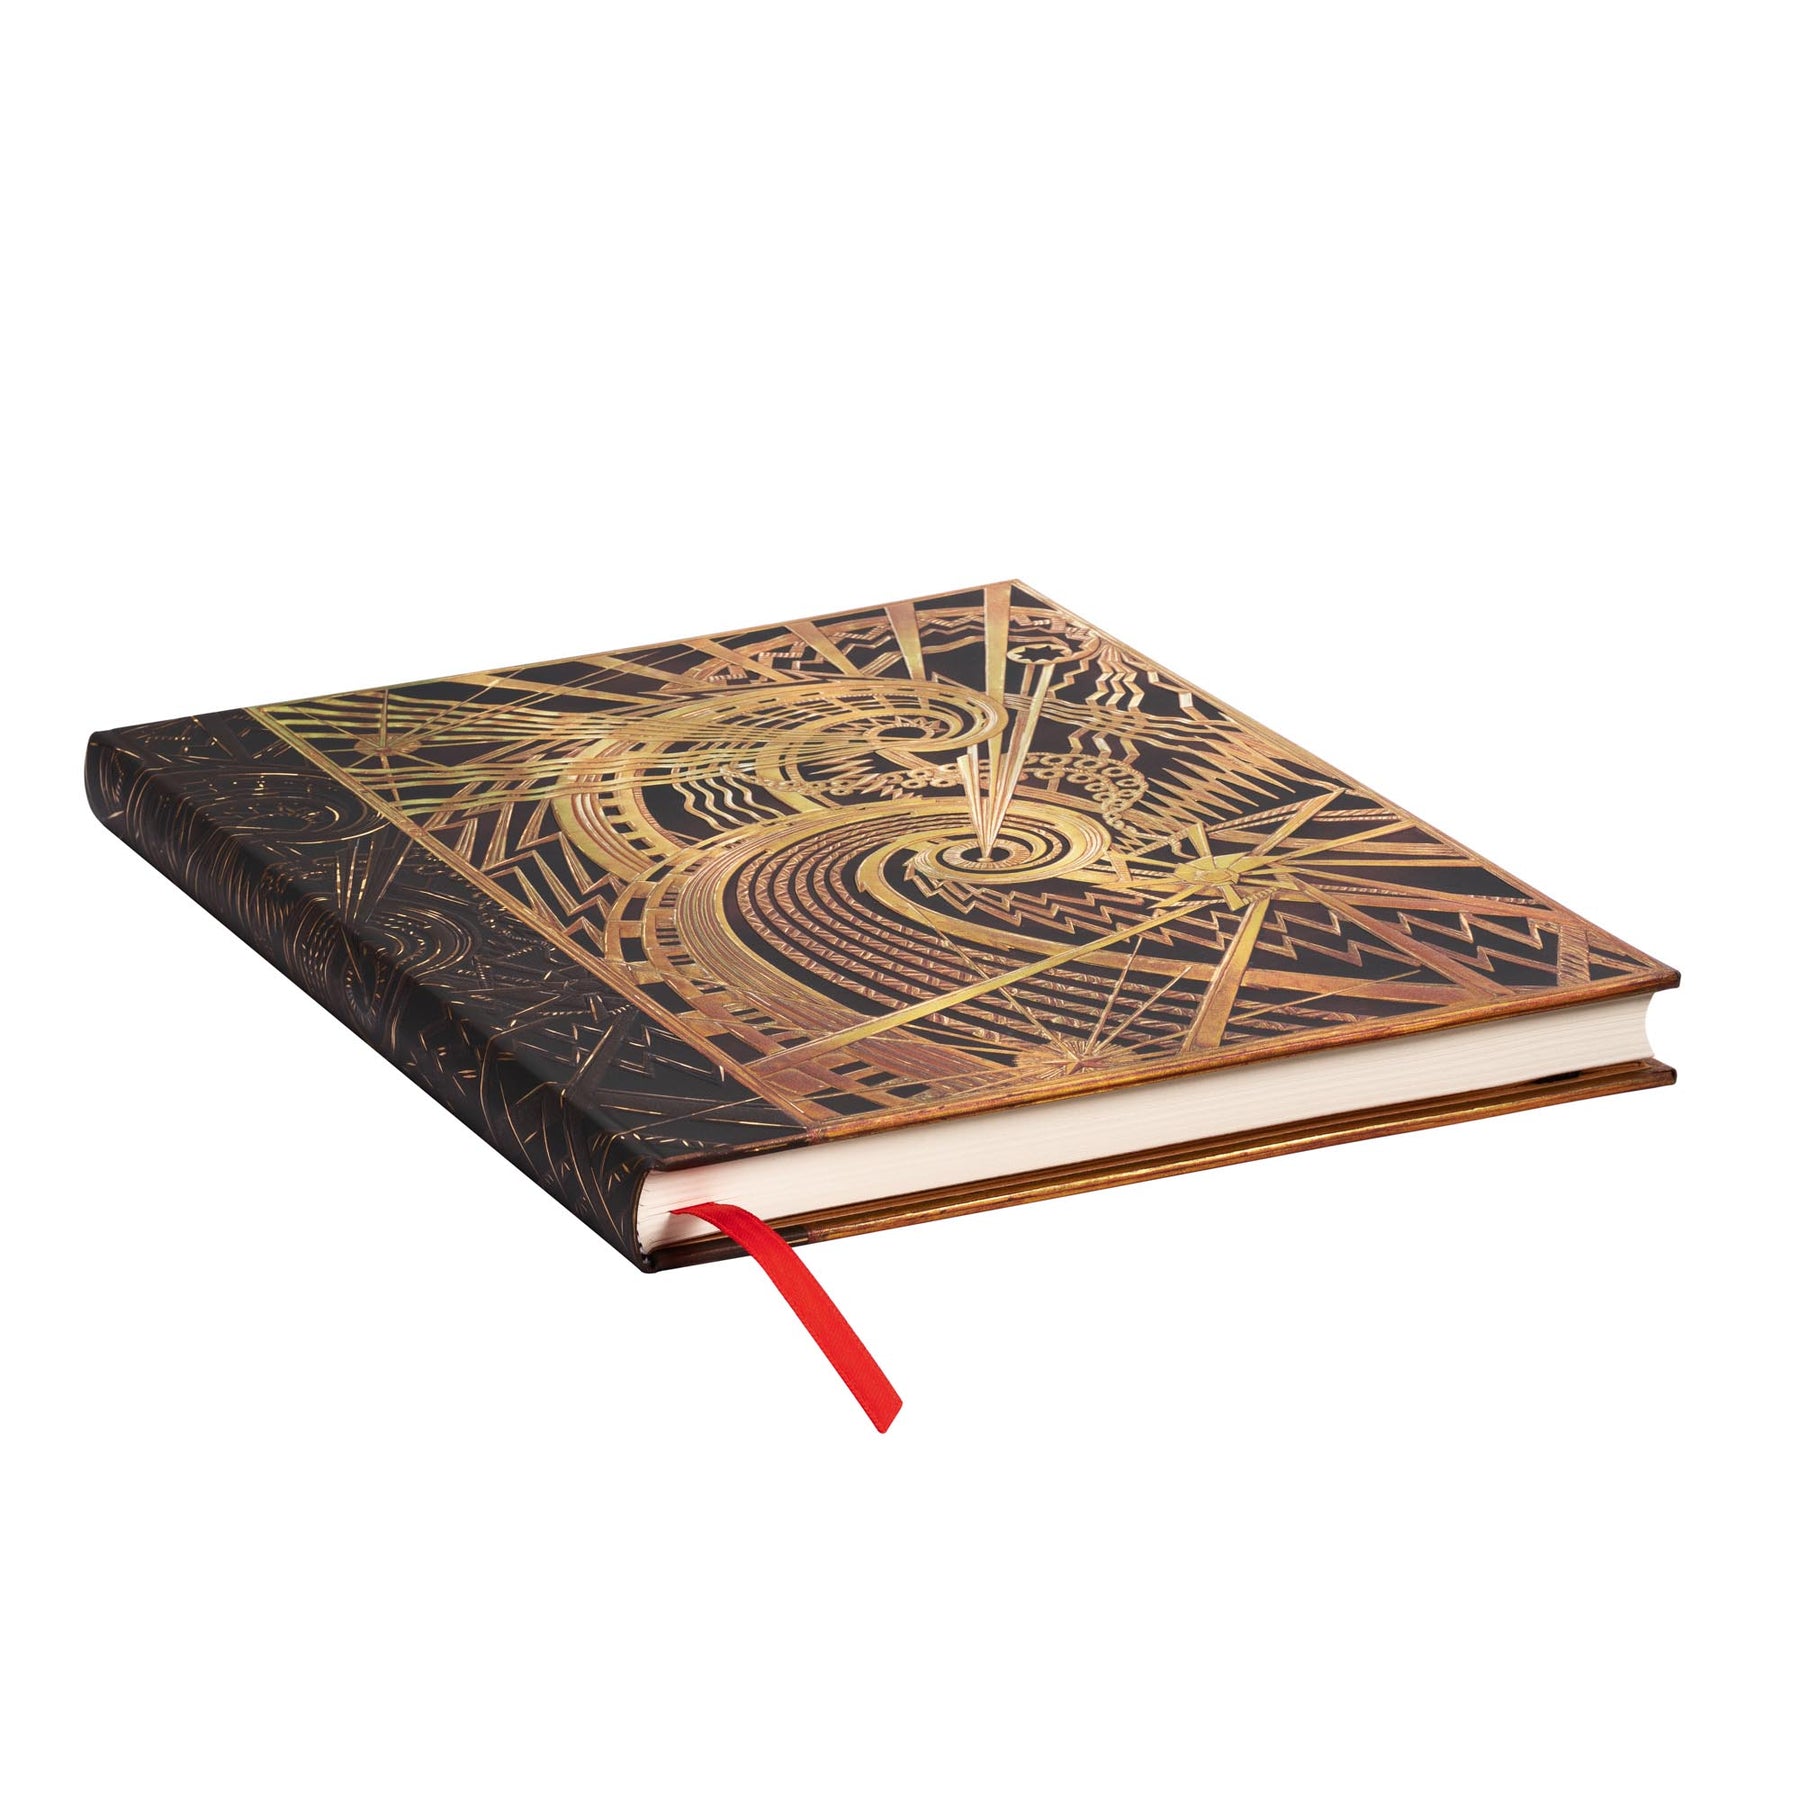 Paperblanks New York Deco- The Chanin Spiral Ultra